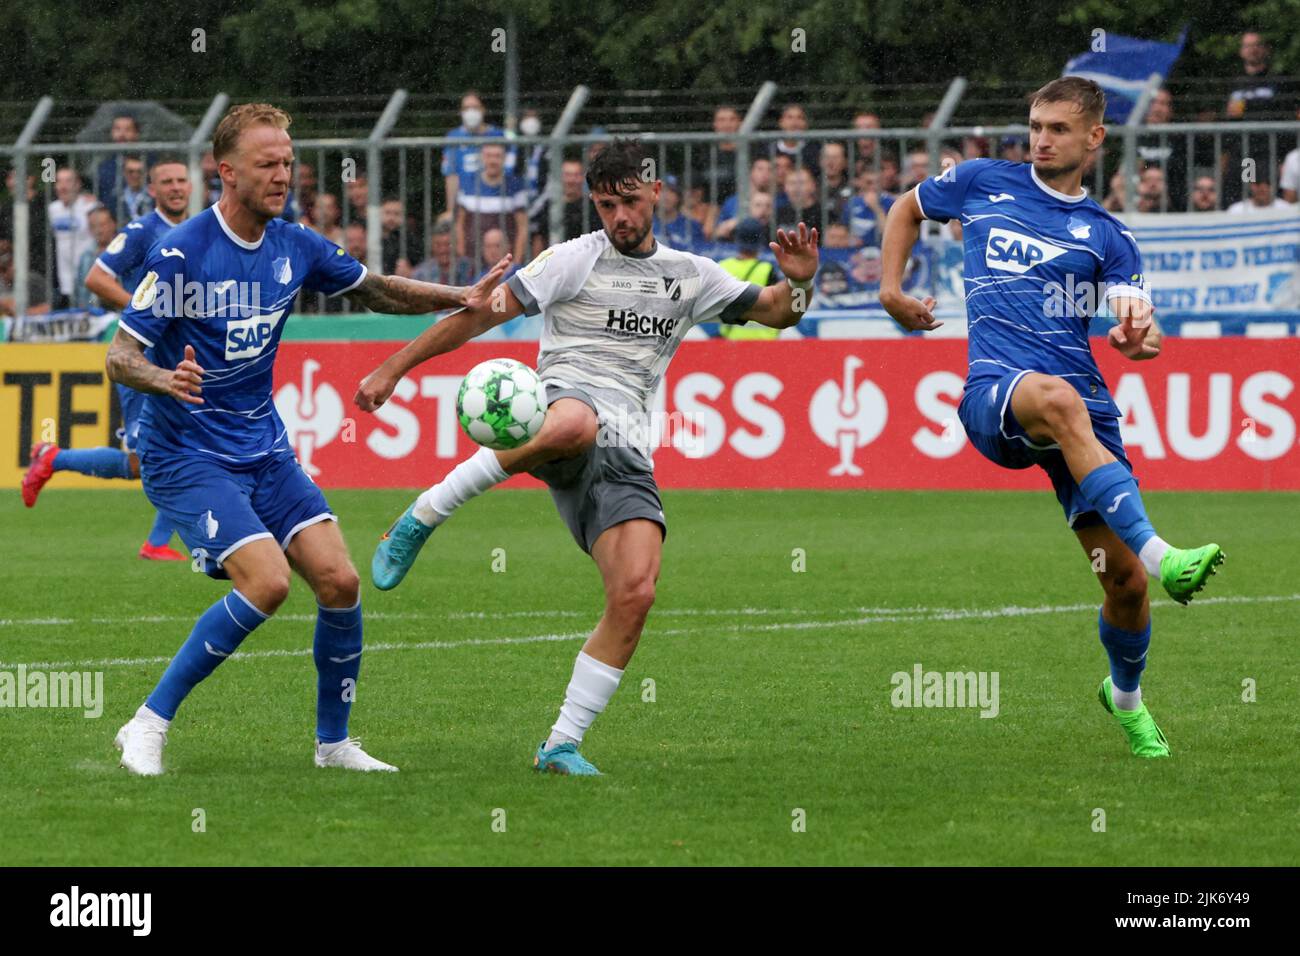 Rodinghausen, Germany. 31st July, 2022. 31 July 2022, North Rhine-Westphalia, Rödinghausen: Soccer: DFB Cup, SV Rödinghausen - TSG 1899 Hoffenheim, 1st round, Häcker-Wiehenstadion. Rödinghausen's Vincent Schaub (center) battles for the ball with Hoffenheim's Kevin Vogt (left) and Stefan Posch (right). Photo: Friso Gentsch/dpa - IMPORTANT NOTE: In accordance with the requirements of the DFL Deutsche Fußball Liga and the DFB Deutscher Fußball-Bund, it is prohibited to use or have used photographs taken in the stadium and/or of the match in the form of sequence pictures and/or video-like photo se Stock Photo